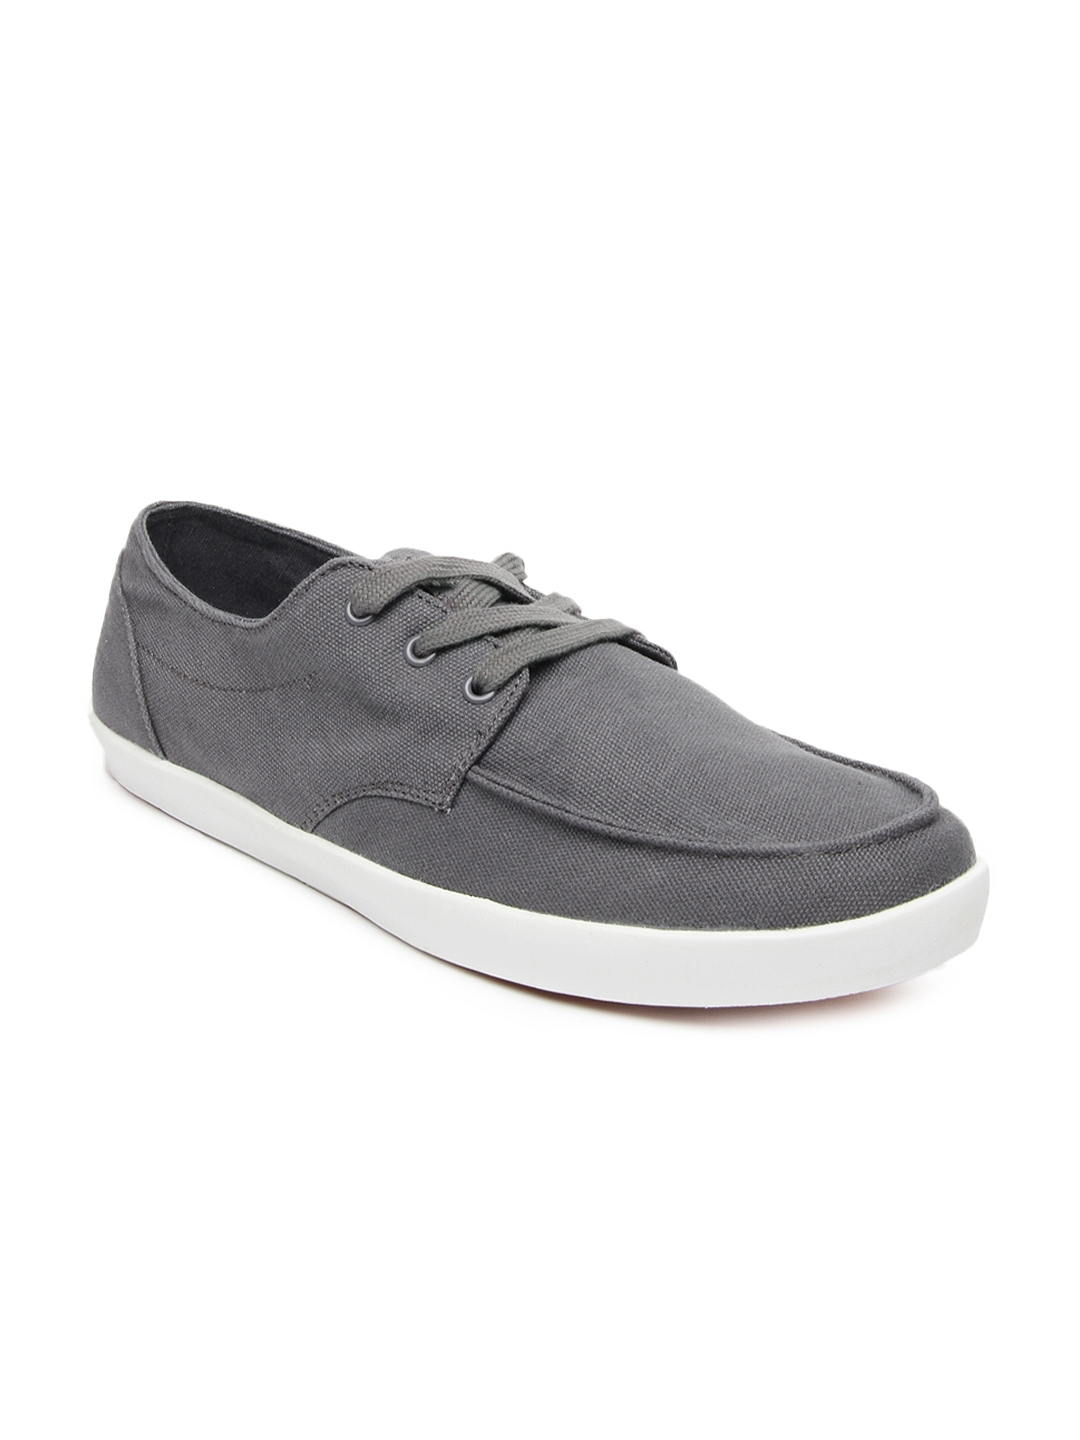 Buy Roadster Men Grey Casual Shoes - Casual Shoes for Men 419421 | Myntra